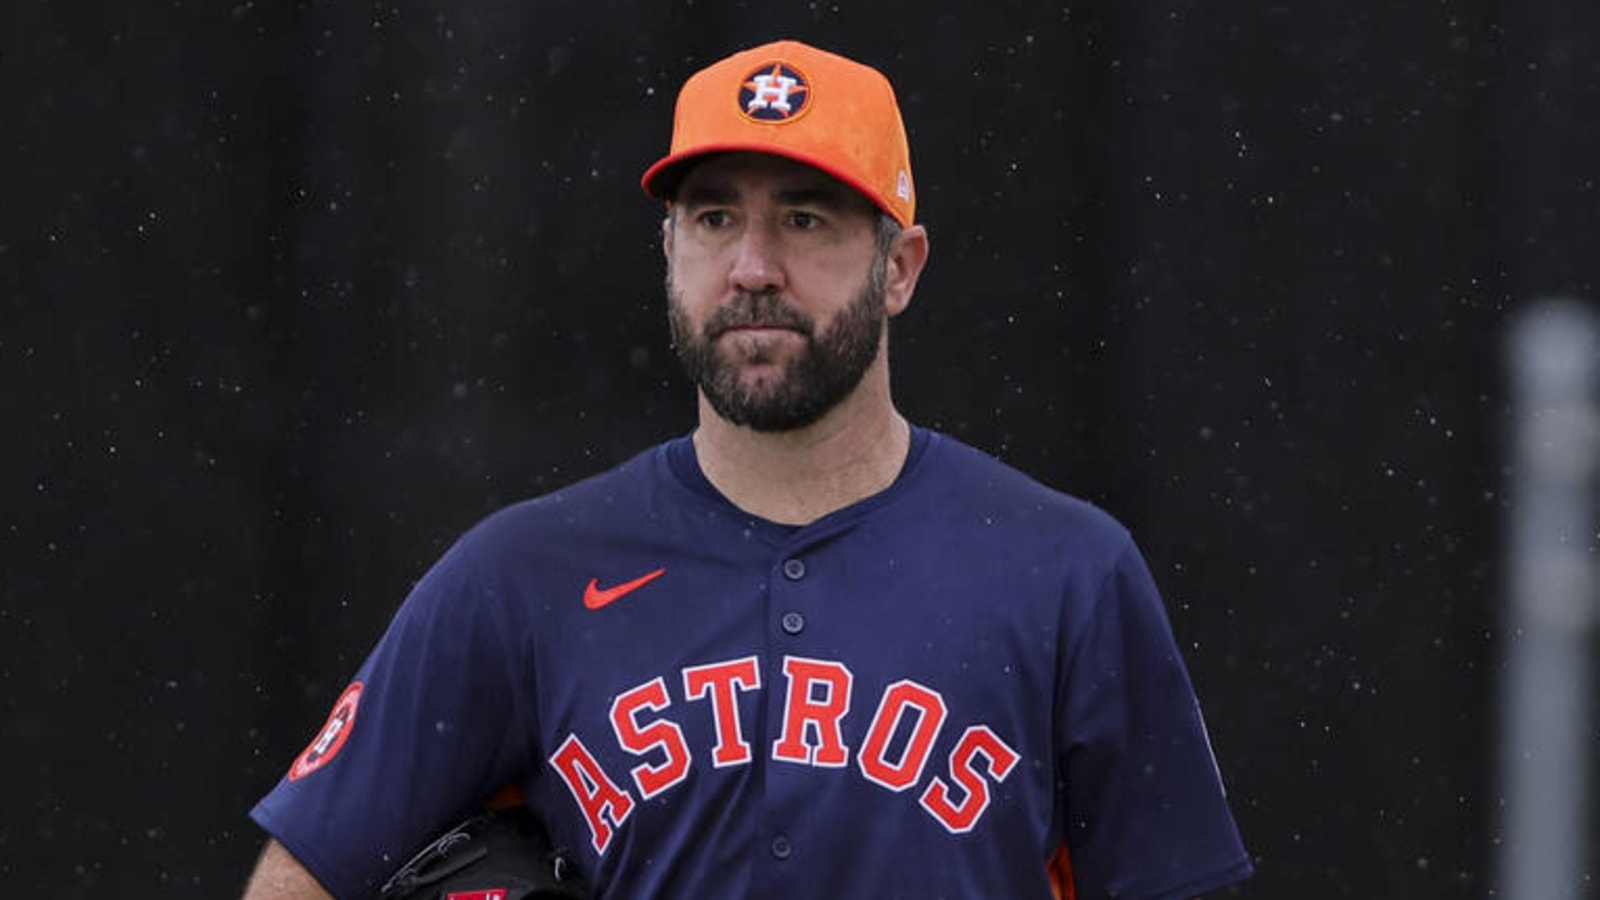 Astros ace speaks out on 'pandemic' of pitcher injuries